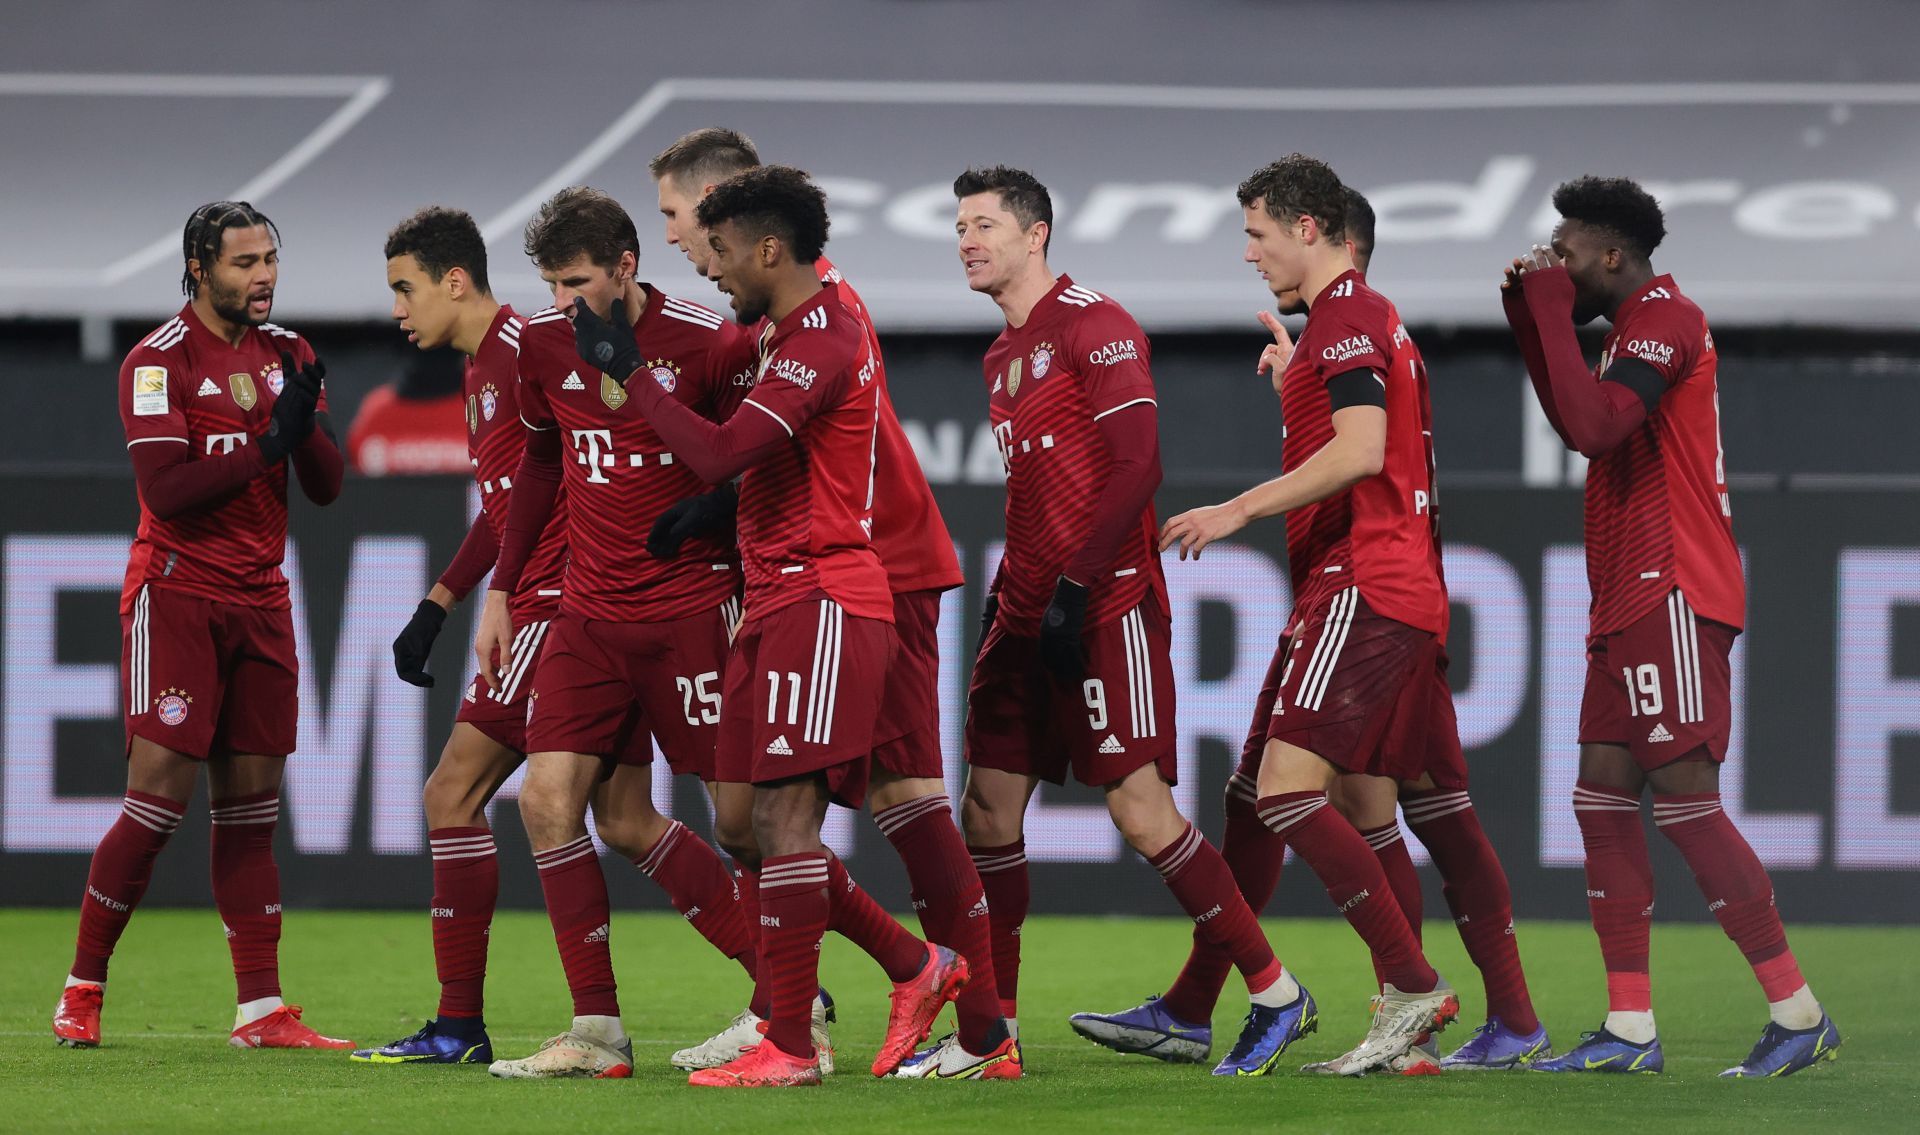 Bayern Munich could go all the way in the 2021-22 UEFA Champions League.